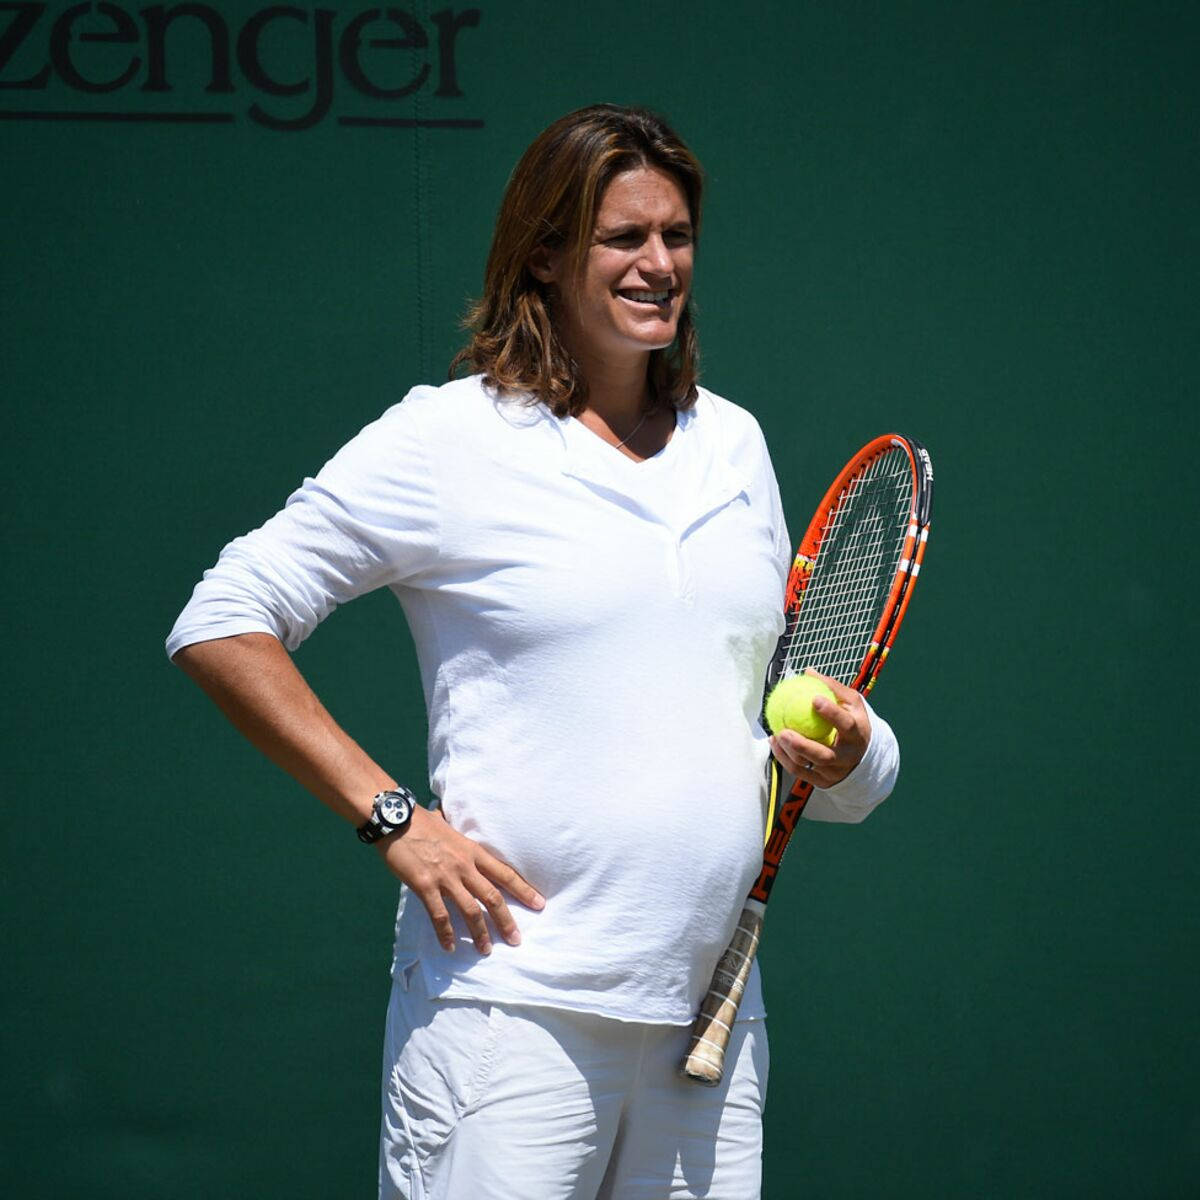 Amélie Mauresmo observing on the sidelines during a tennis match. Wallpaper